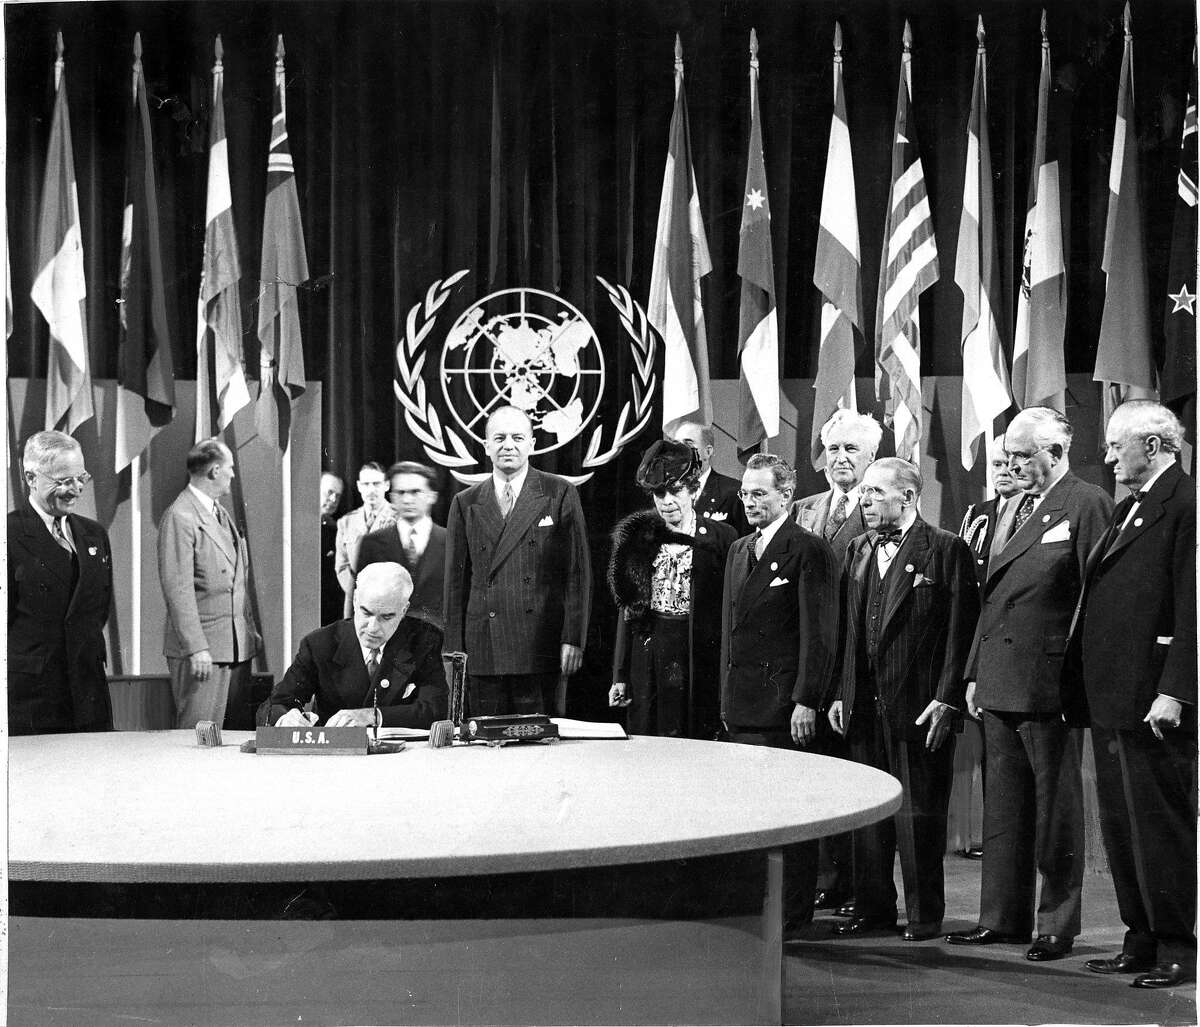 United Nations Charter Signing President Harry Truman watches as Secretary of State Stettinious signs the World Charter for the United States Photo ran 06/27/1945, Pg 1 No credit information